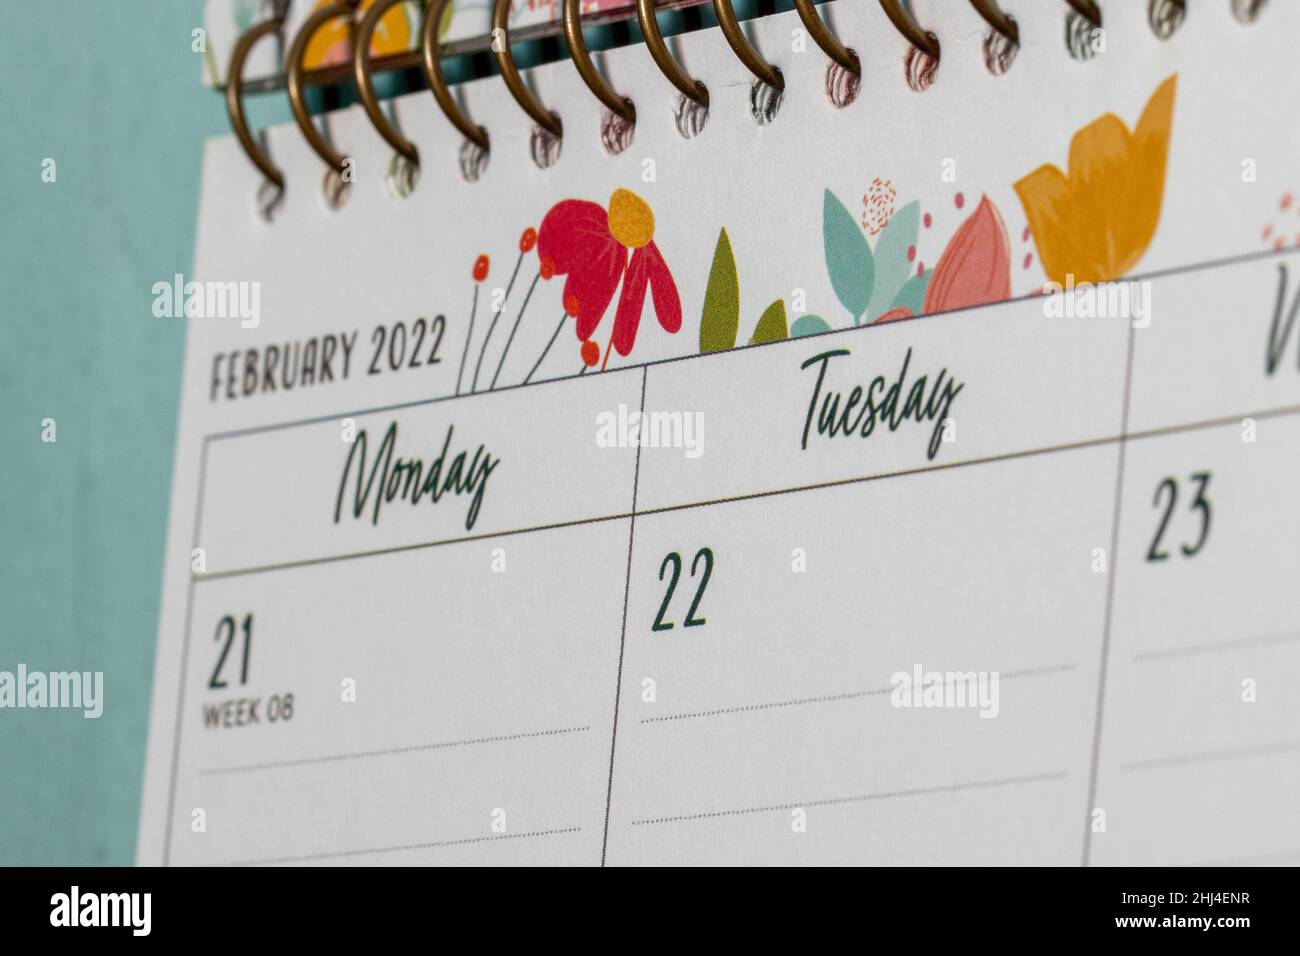 'Twosday' - February 22nd 2022 a palindrome date 22/02/2022 Stock Photo